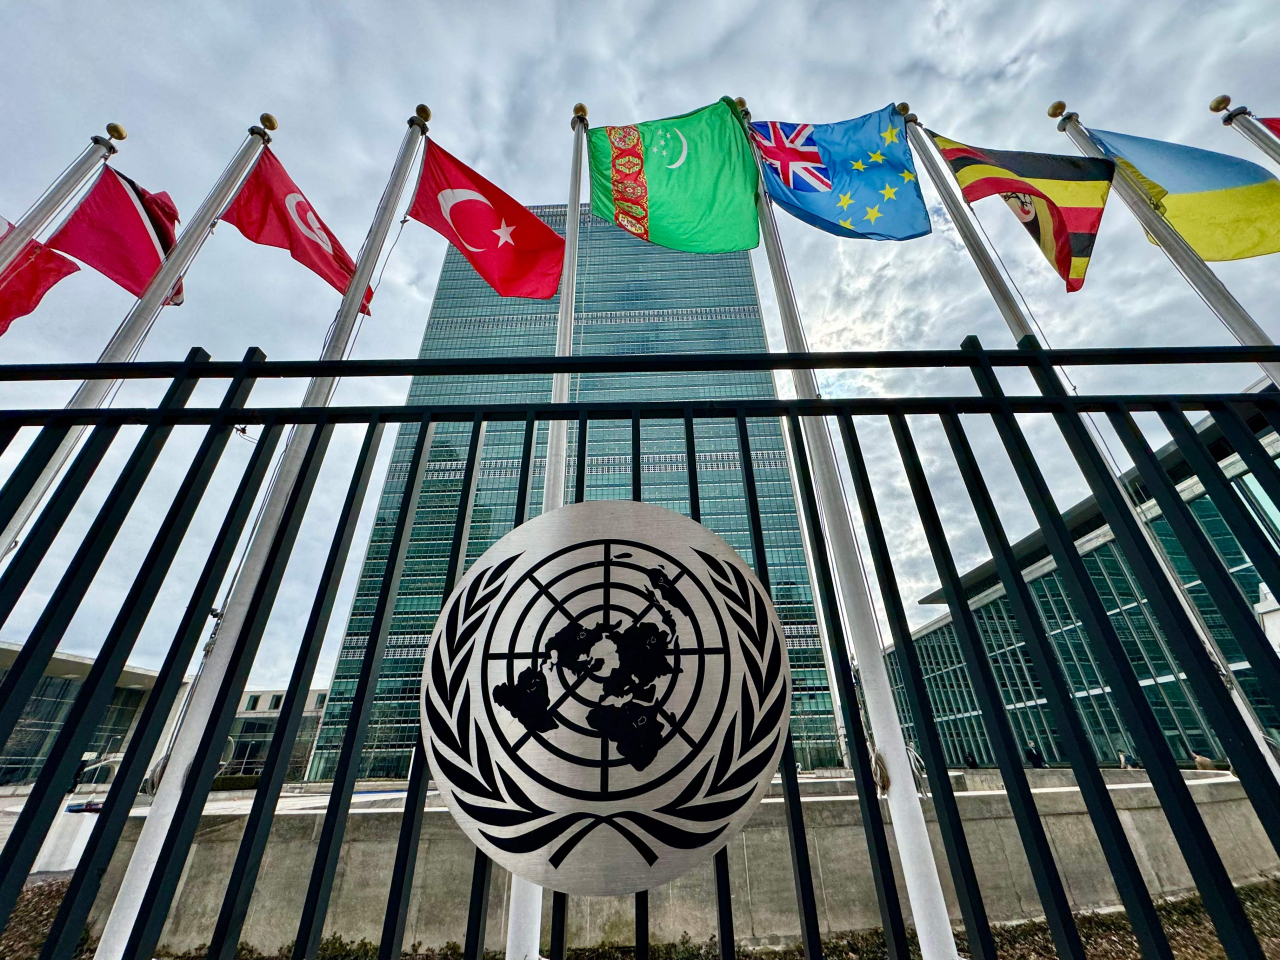 The United Nations headquarters building, in New York City, on Monday. (AFP-Yonhap)